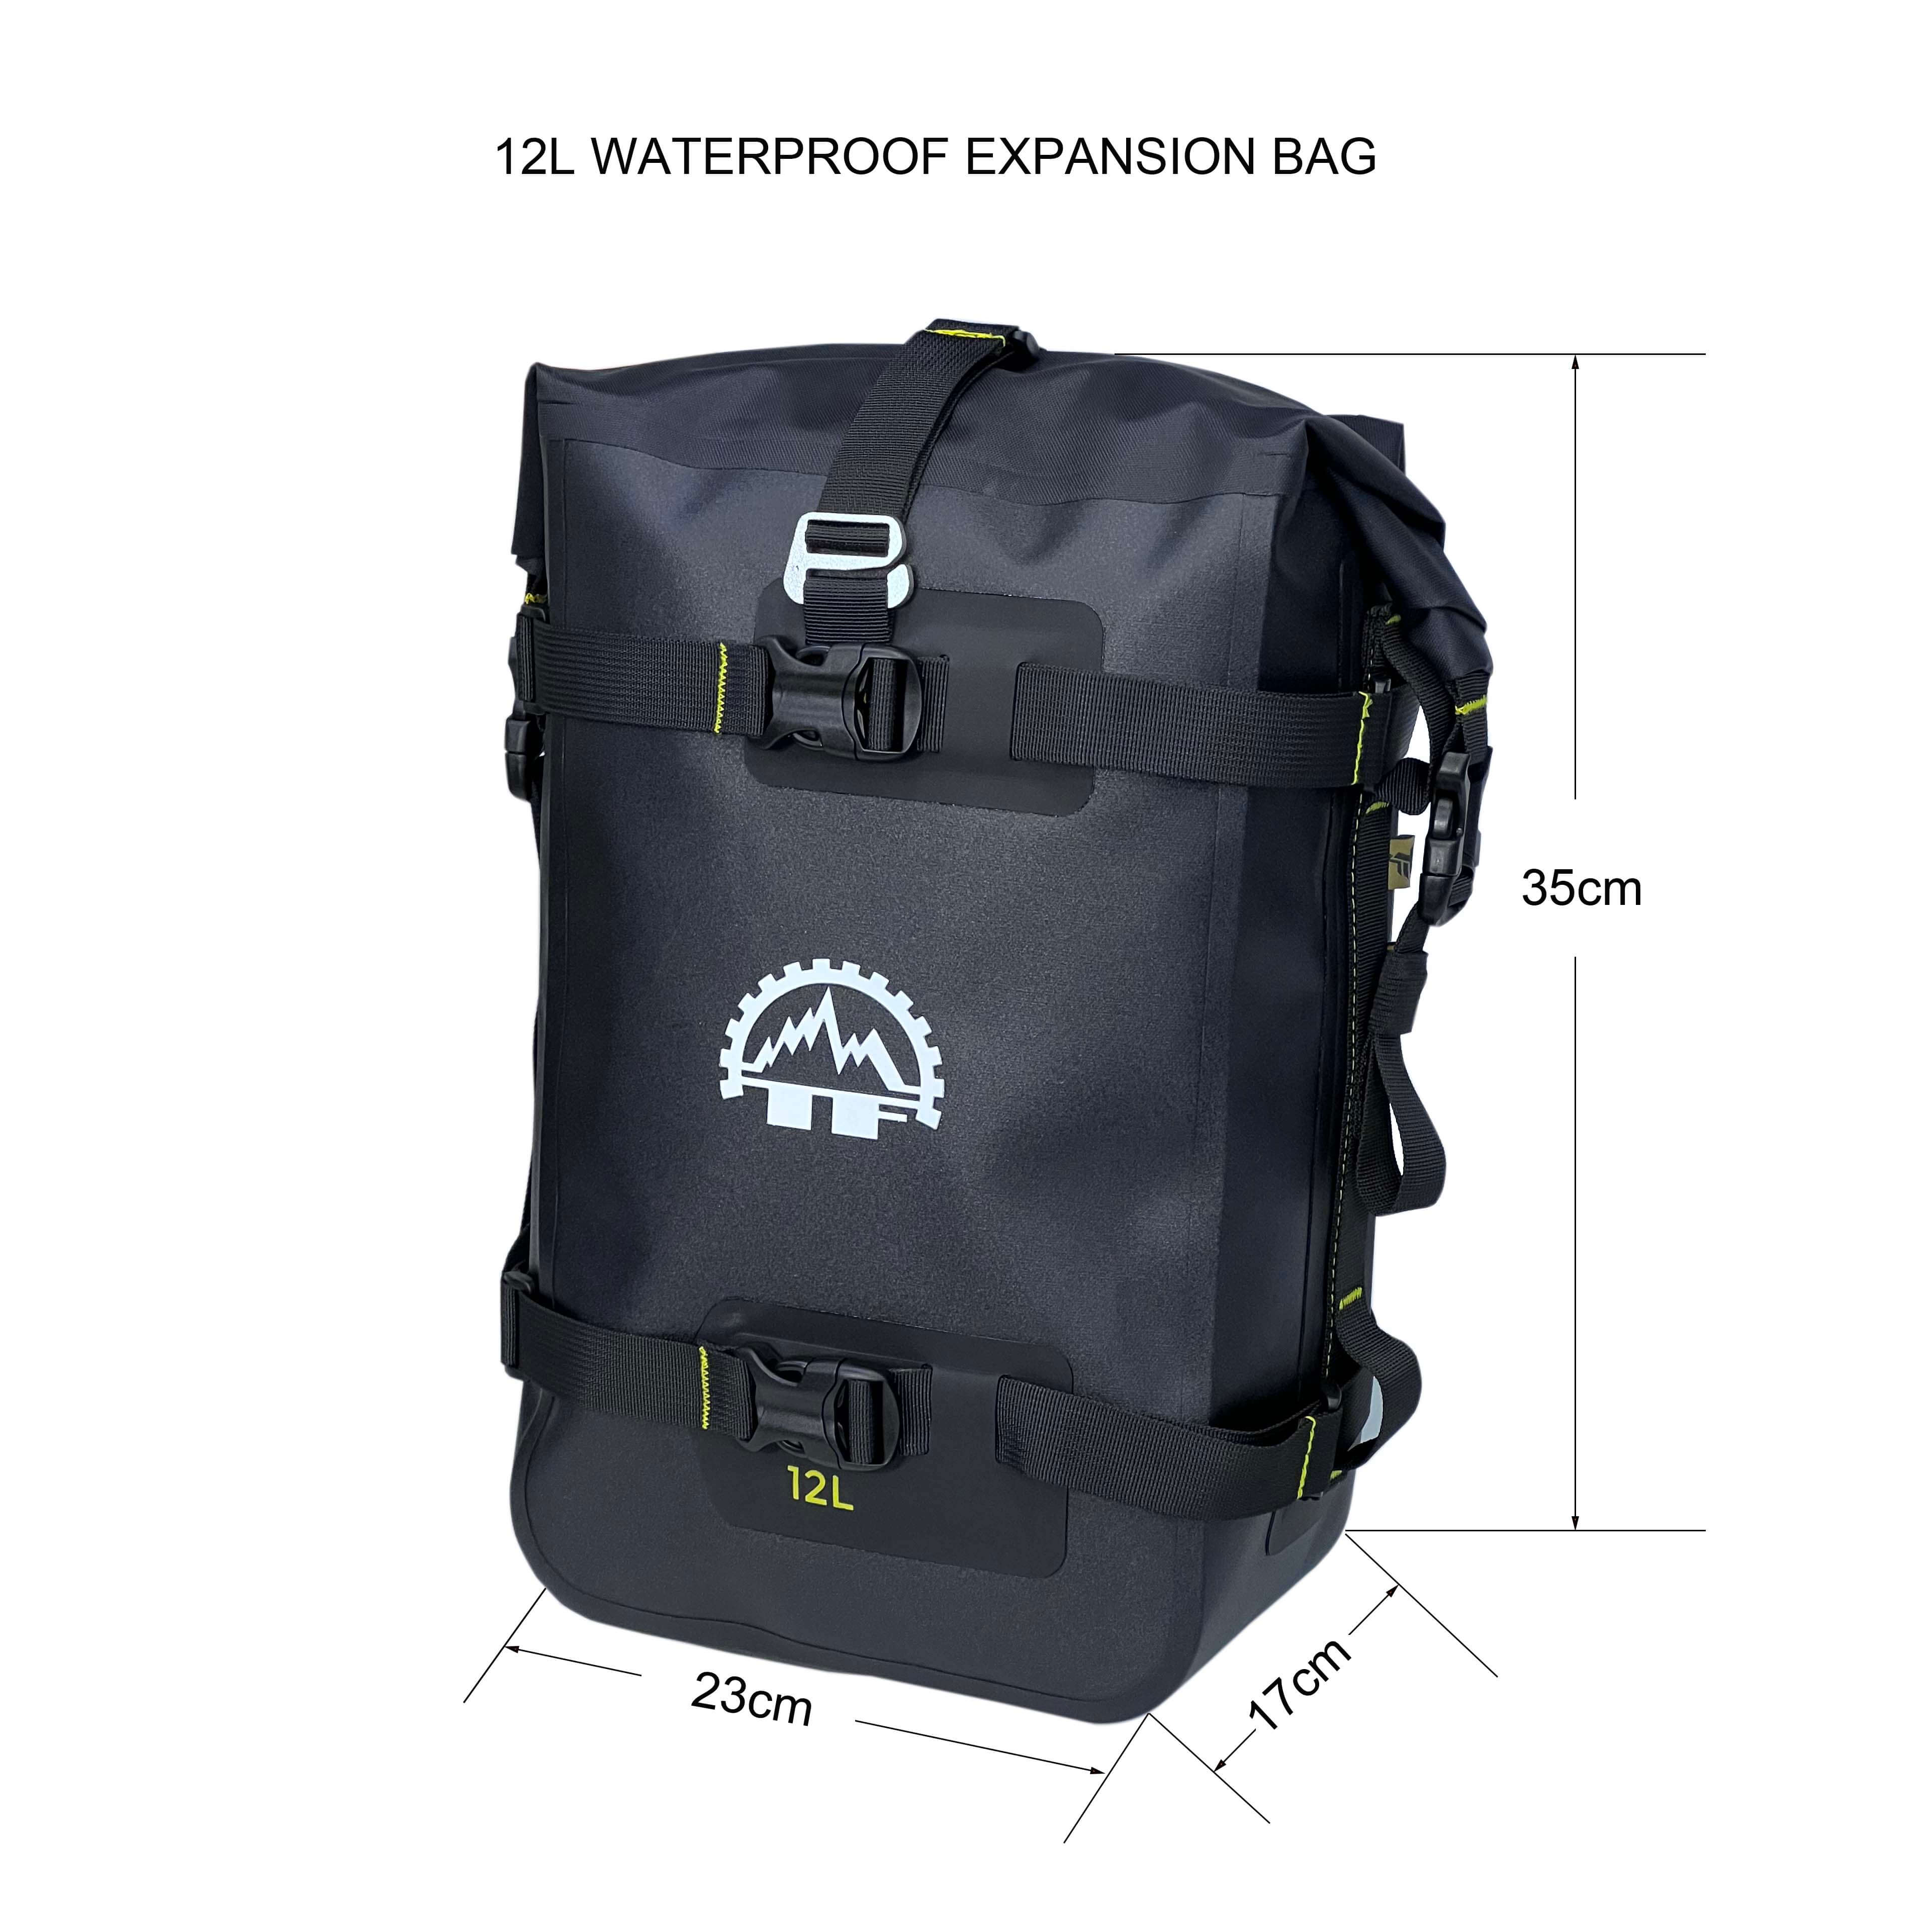 12L Extreme Waterproof Saddle Bags